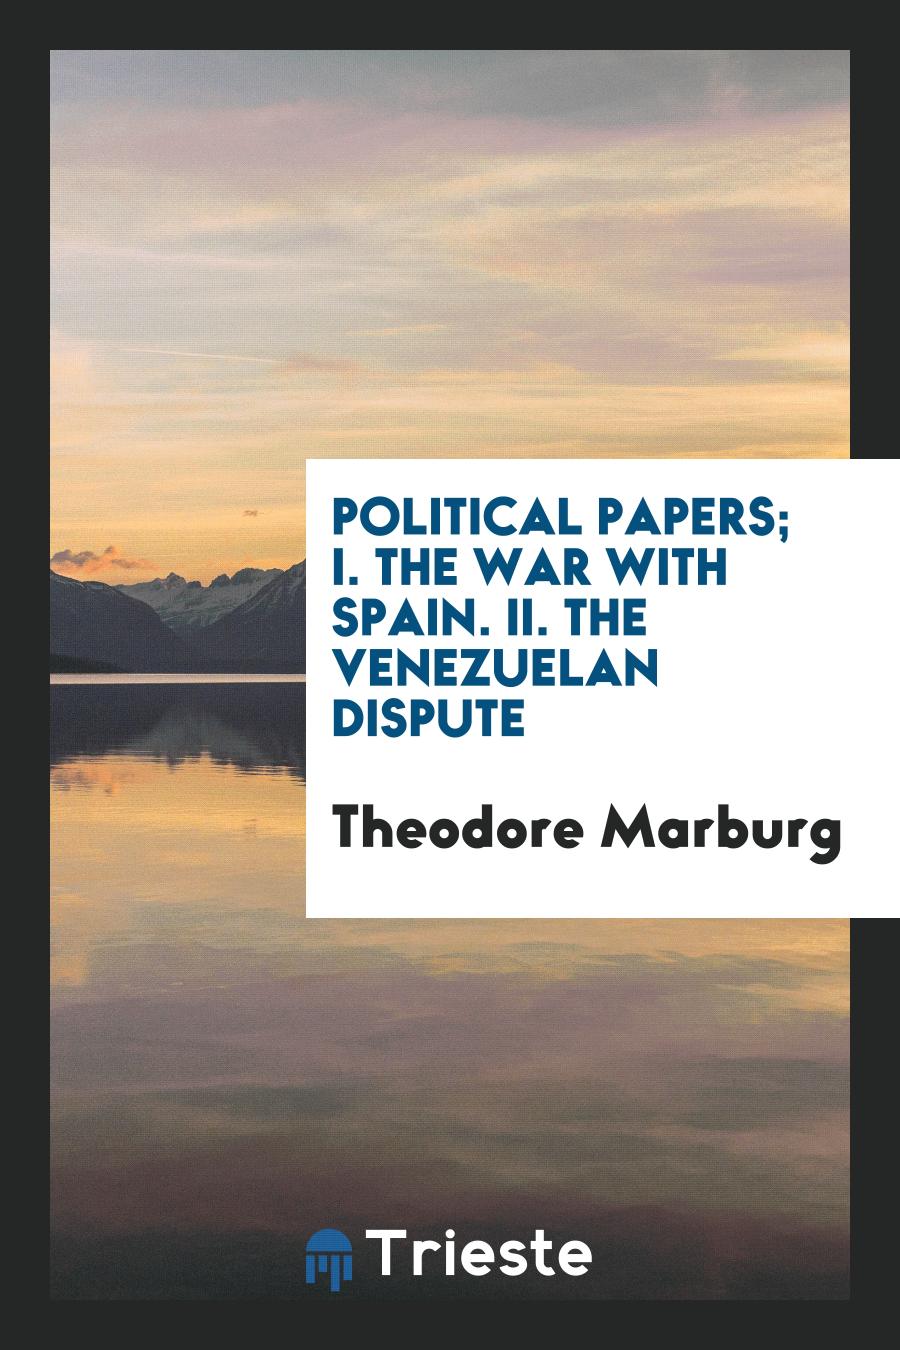 Political papers; I. The war with Spain. II. The Venezuelan dispute